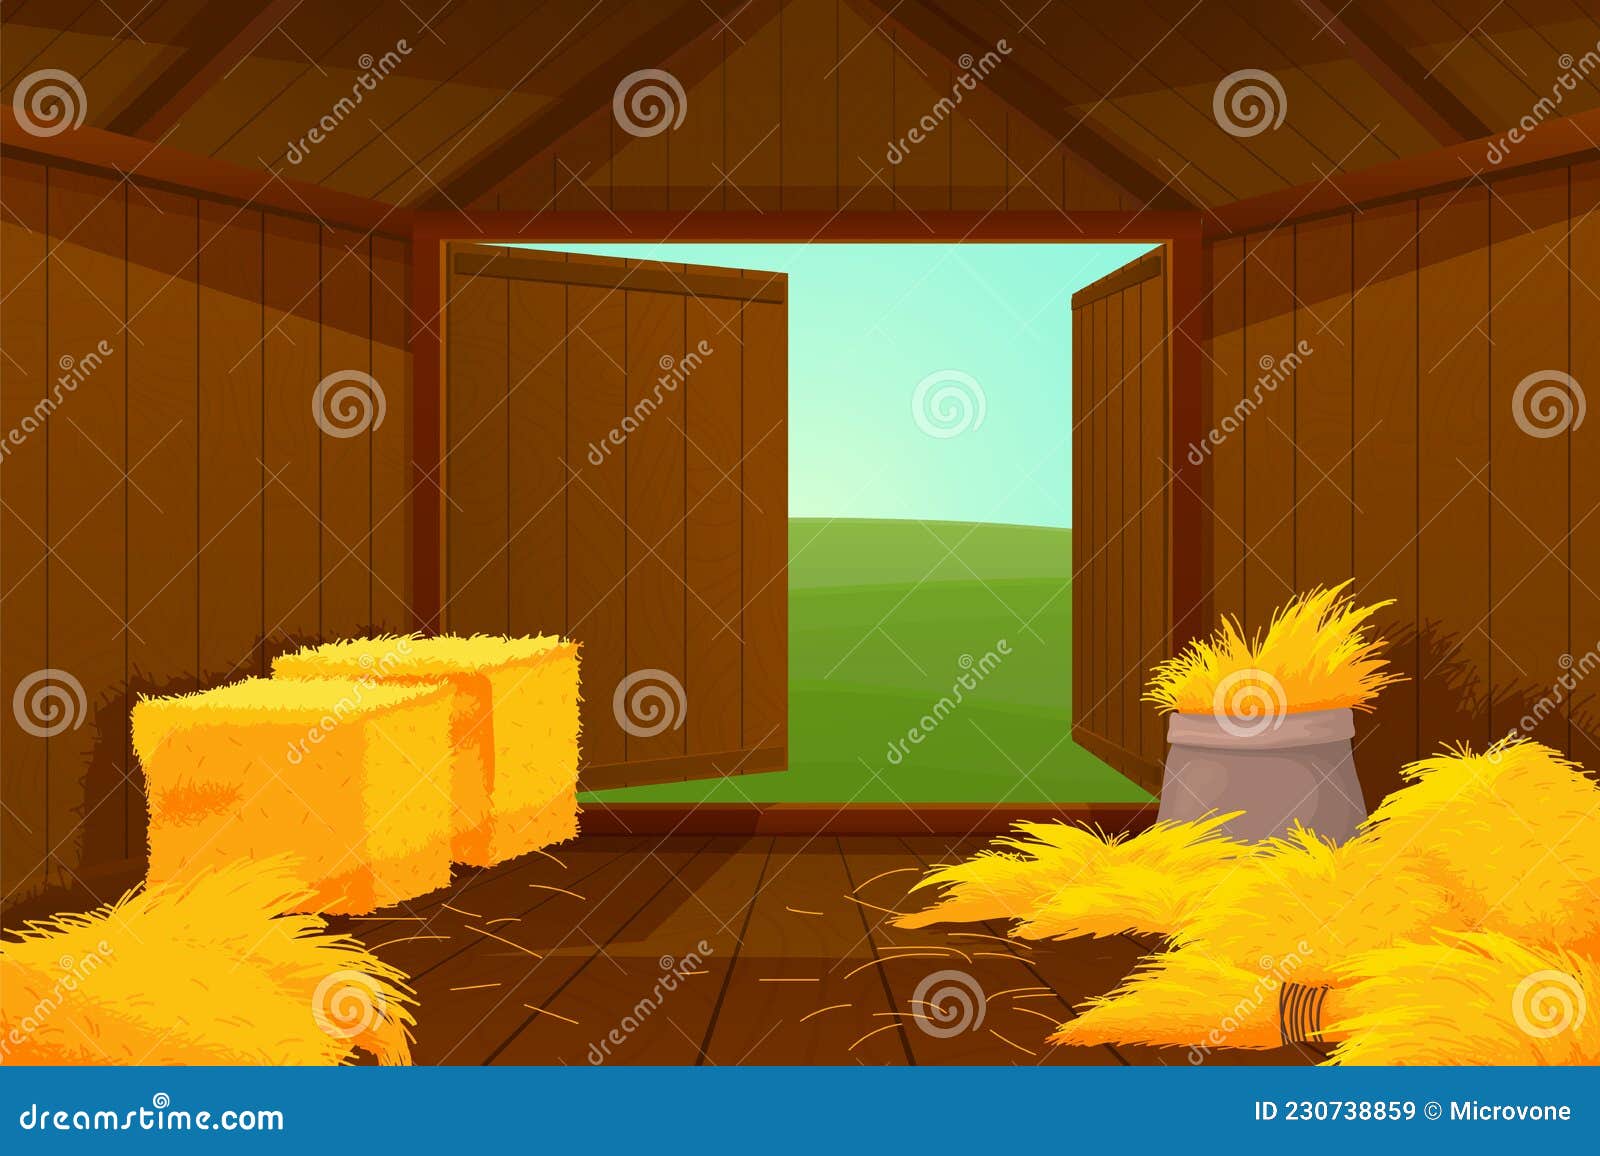 inside barn house. cartoon farm wooden, hay or straw inside. door open into meadow, shed for instruments and agriculture